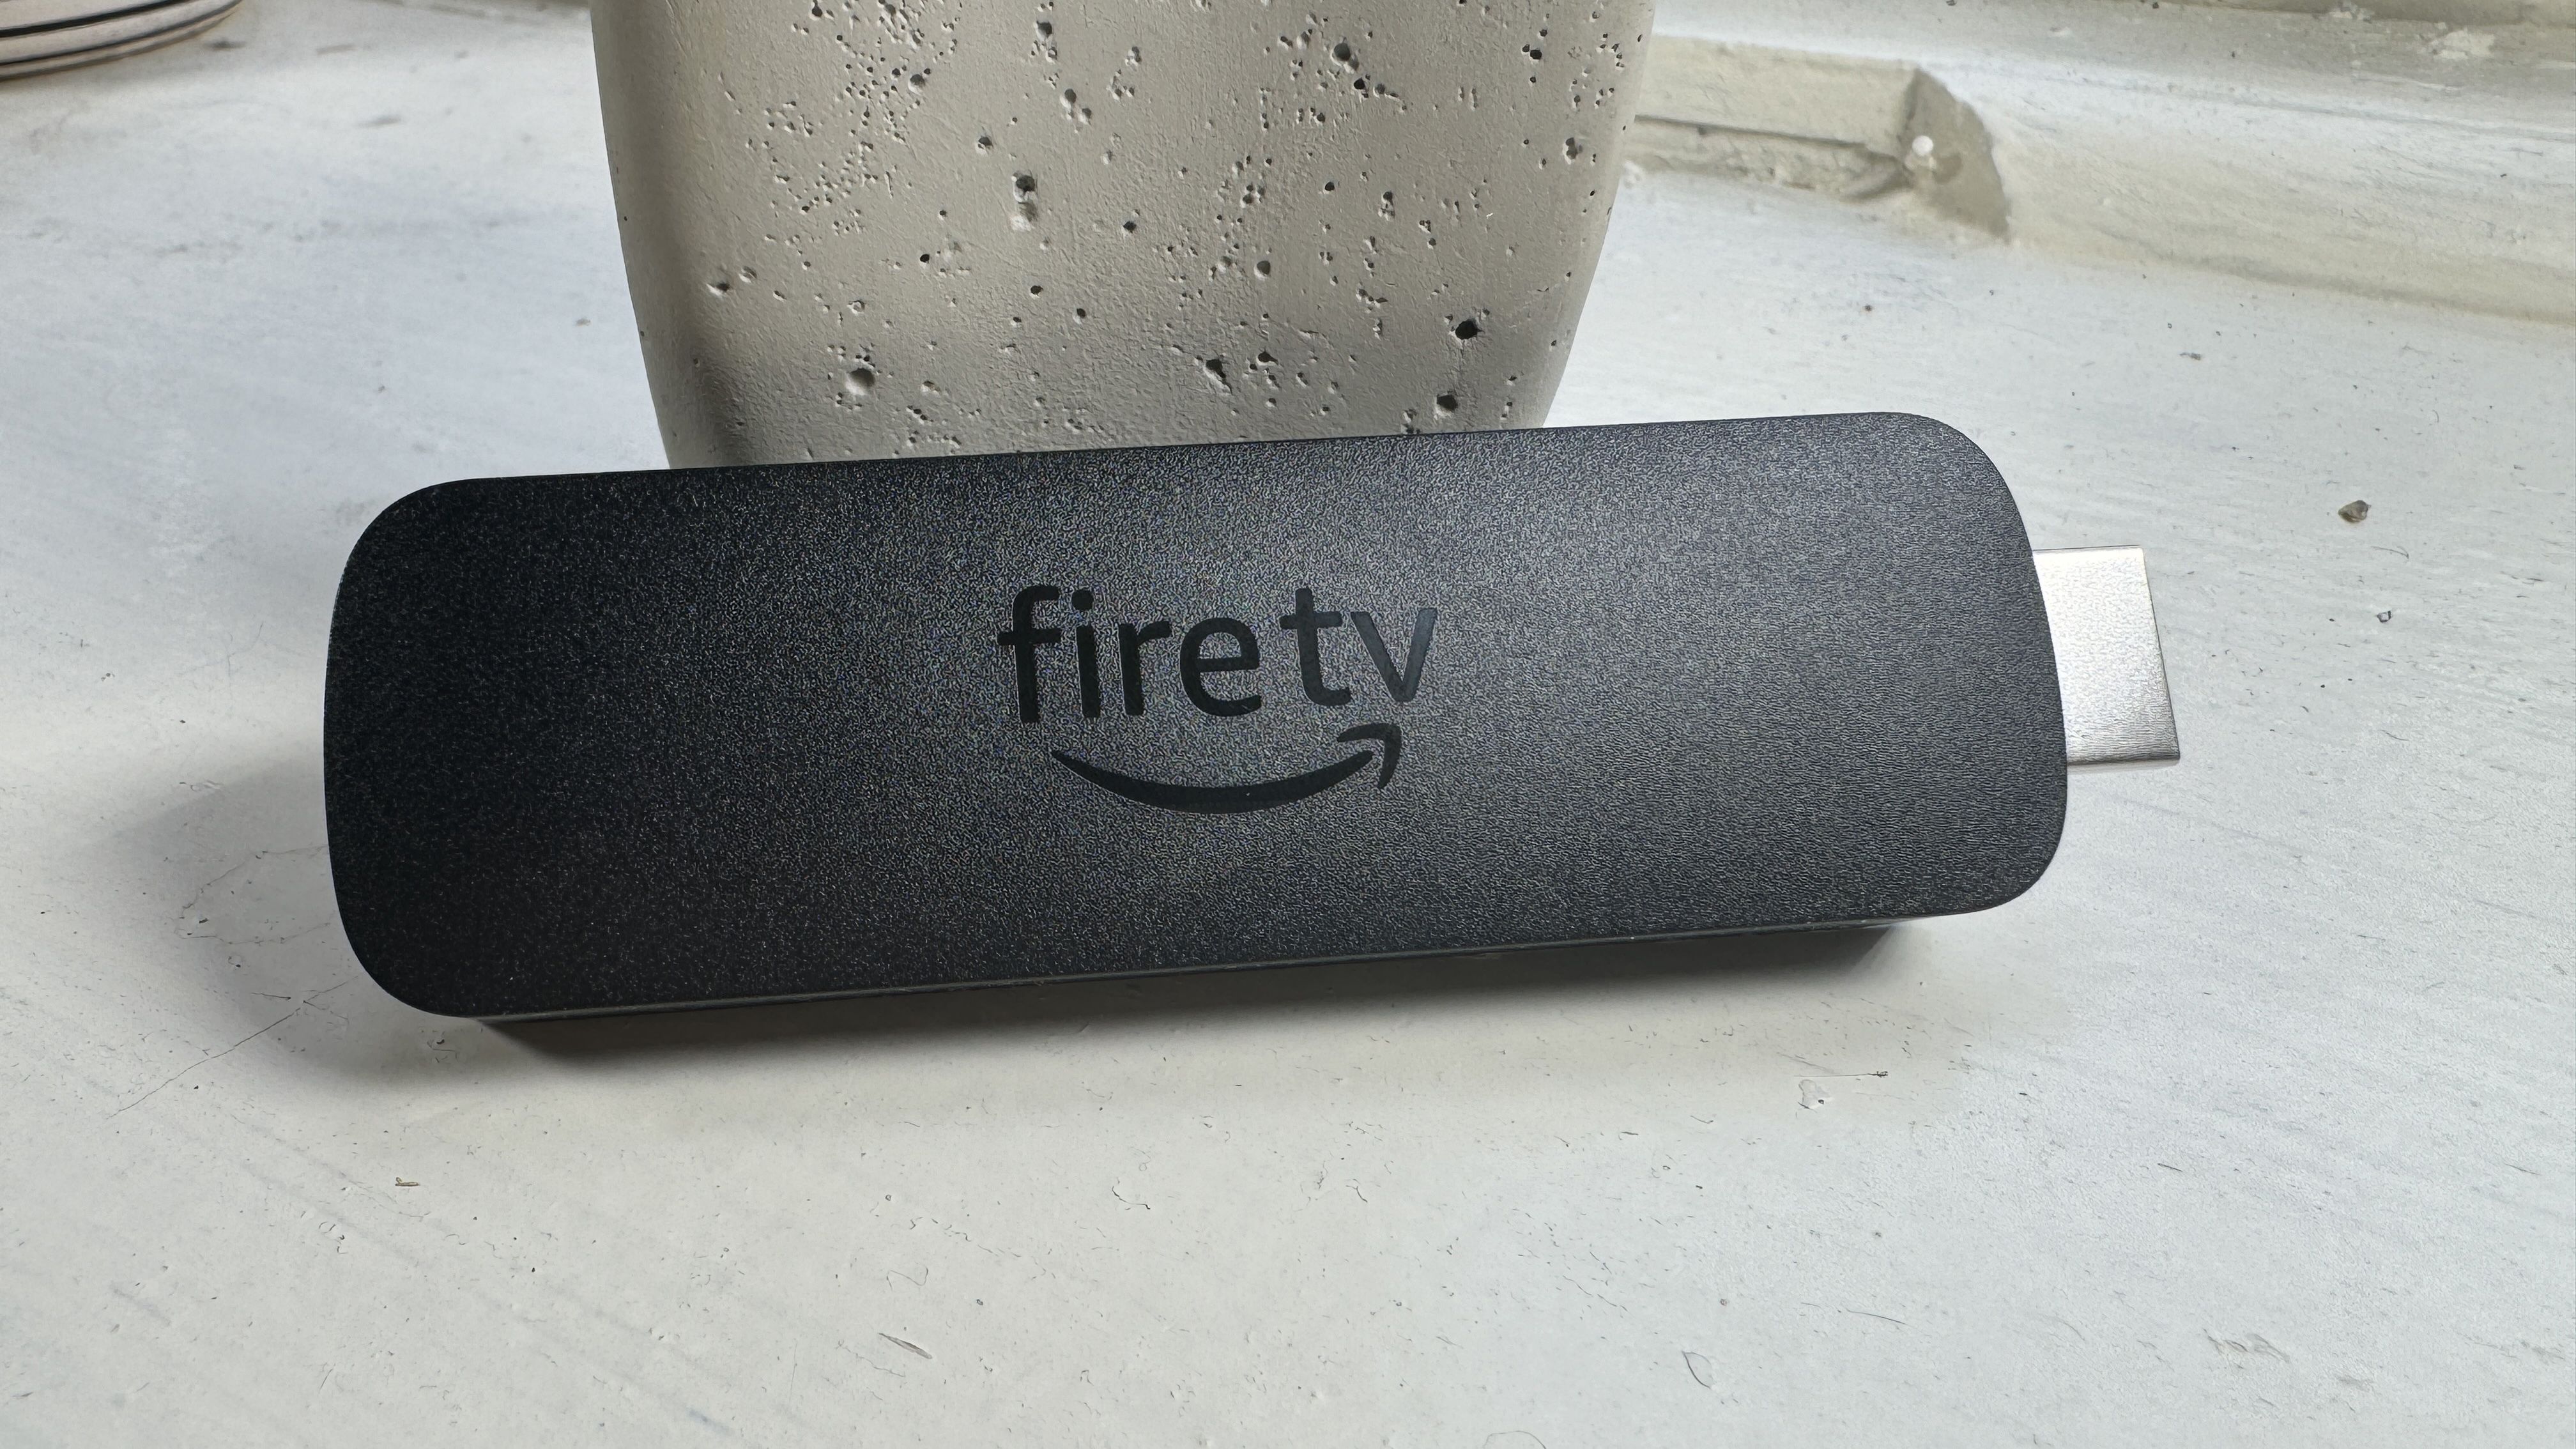 All-new  Fire TV Stick 4K streaming device